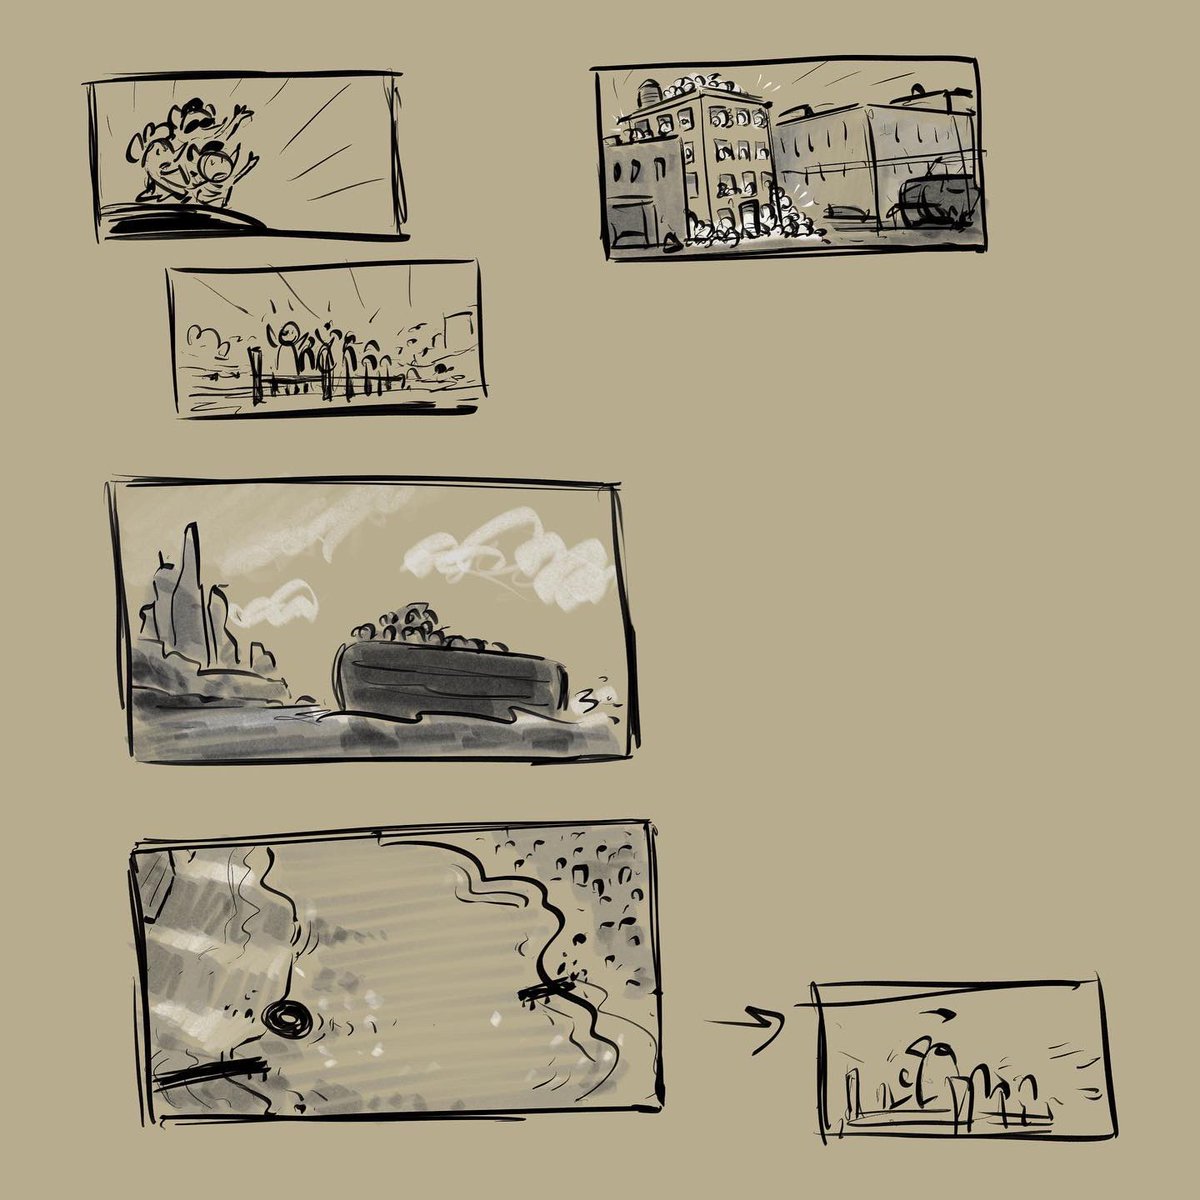 Here's some more story development sketches from the #godfatherofthebride short from #ZootopiaPlus. Director @TrentCorrey knew from the start he wanted to evoke the style of noir and period films. I did a lot of little sketches like this as we developed the story in drawings. 